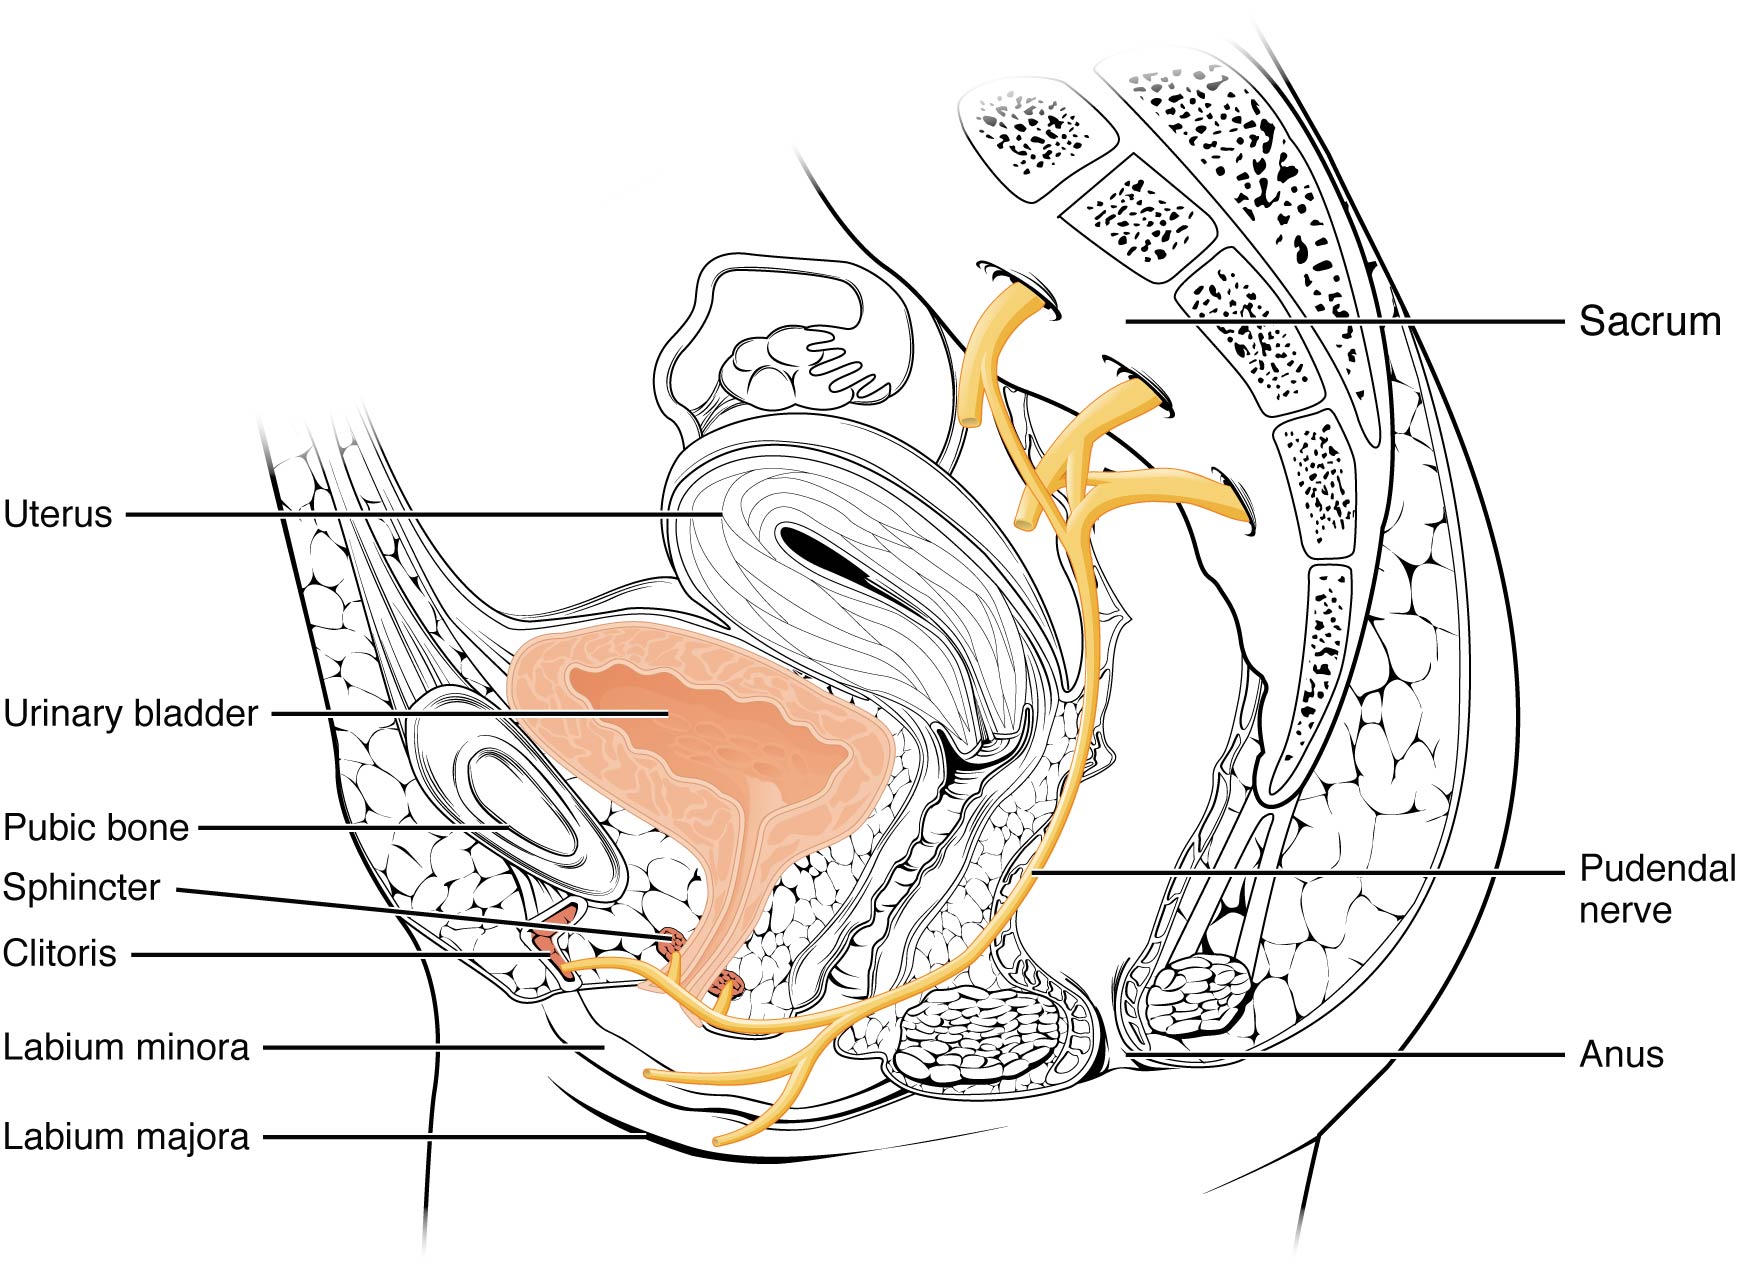 Drawing of a midsagittal view of the female pelvis showing the pudendal nerve exiting the sacrum and innervating the clitoris and vulva region. 